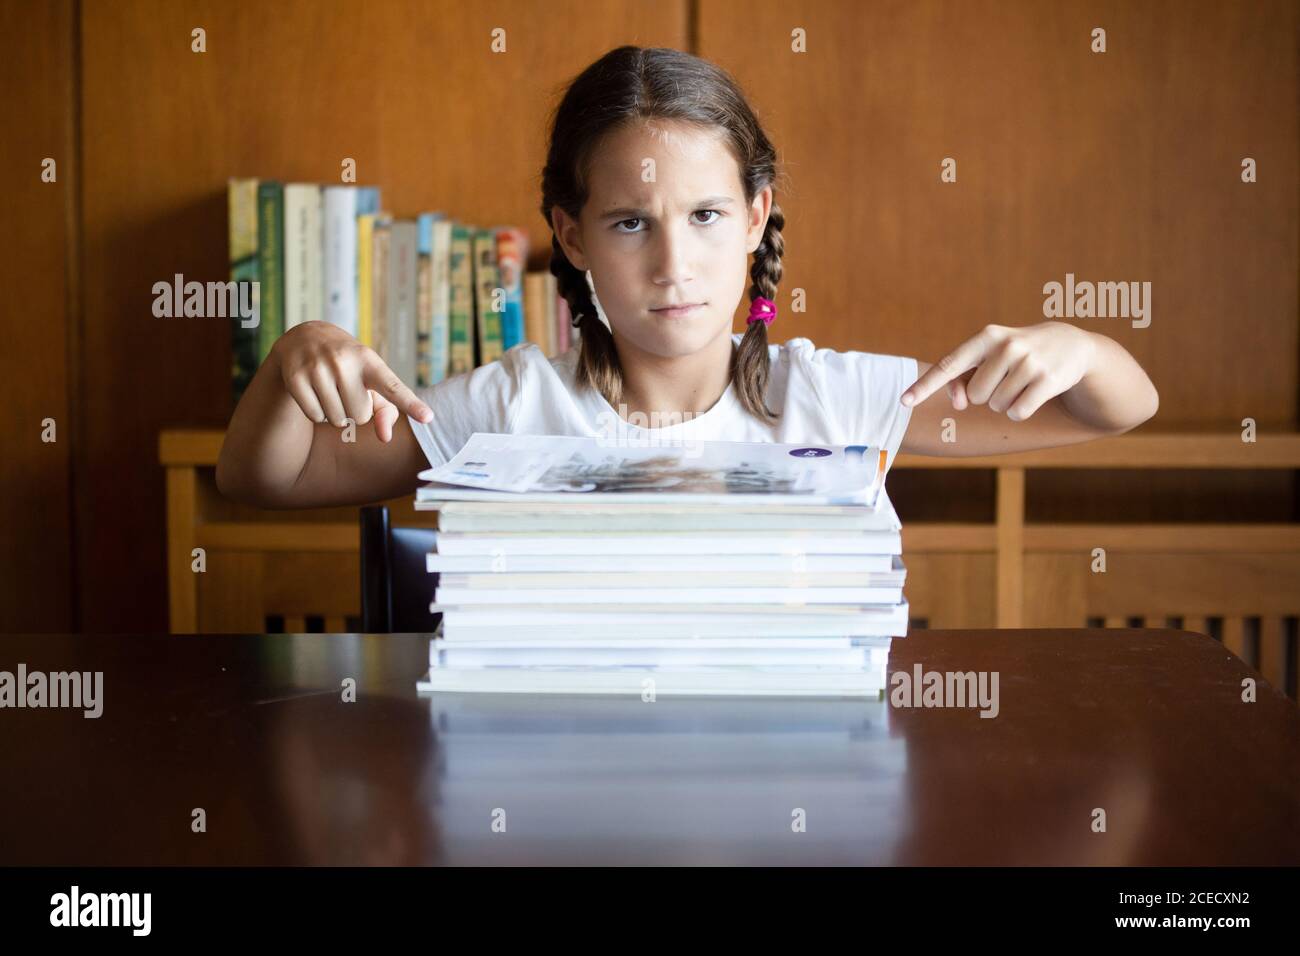 Angry student girl pointing to a pile of textbooks alone at home Stock Photo